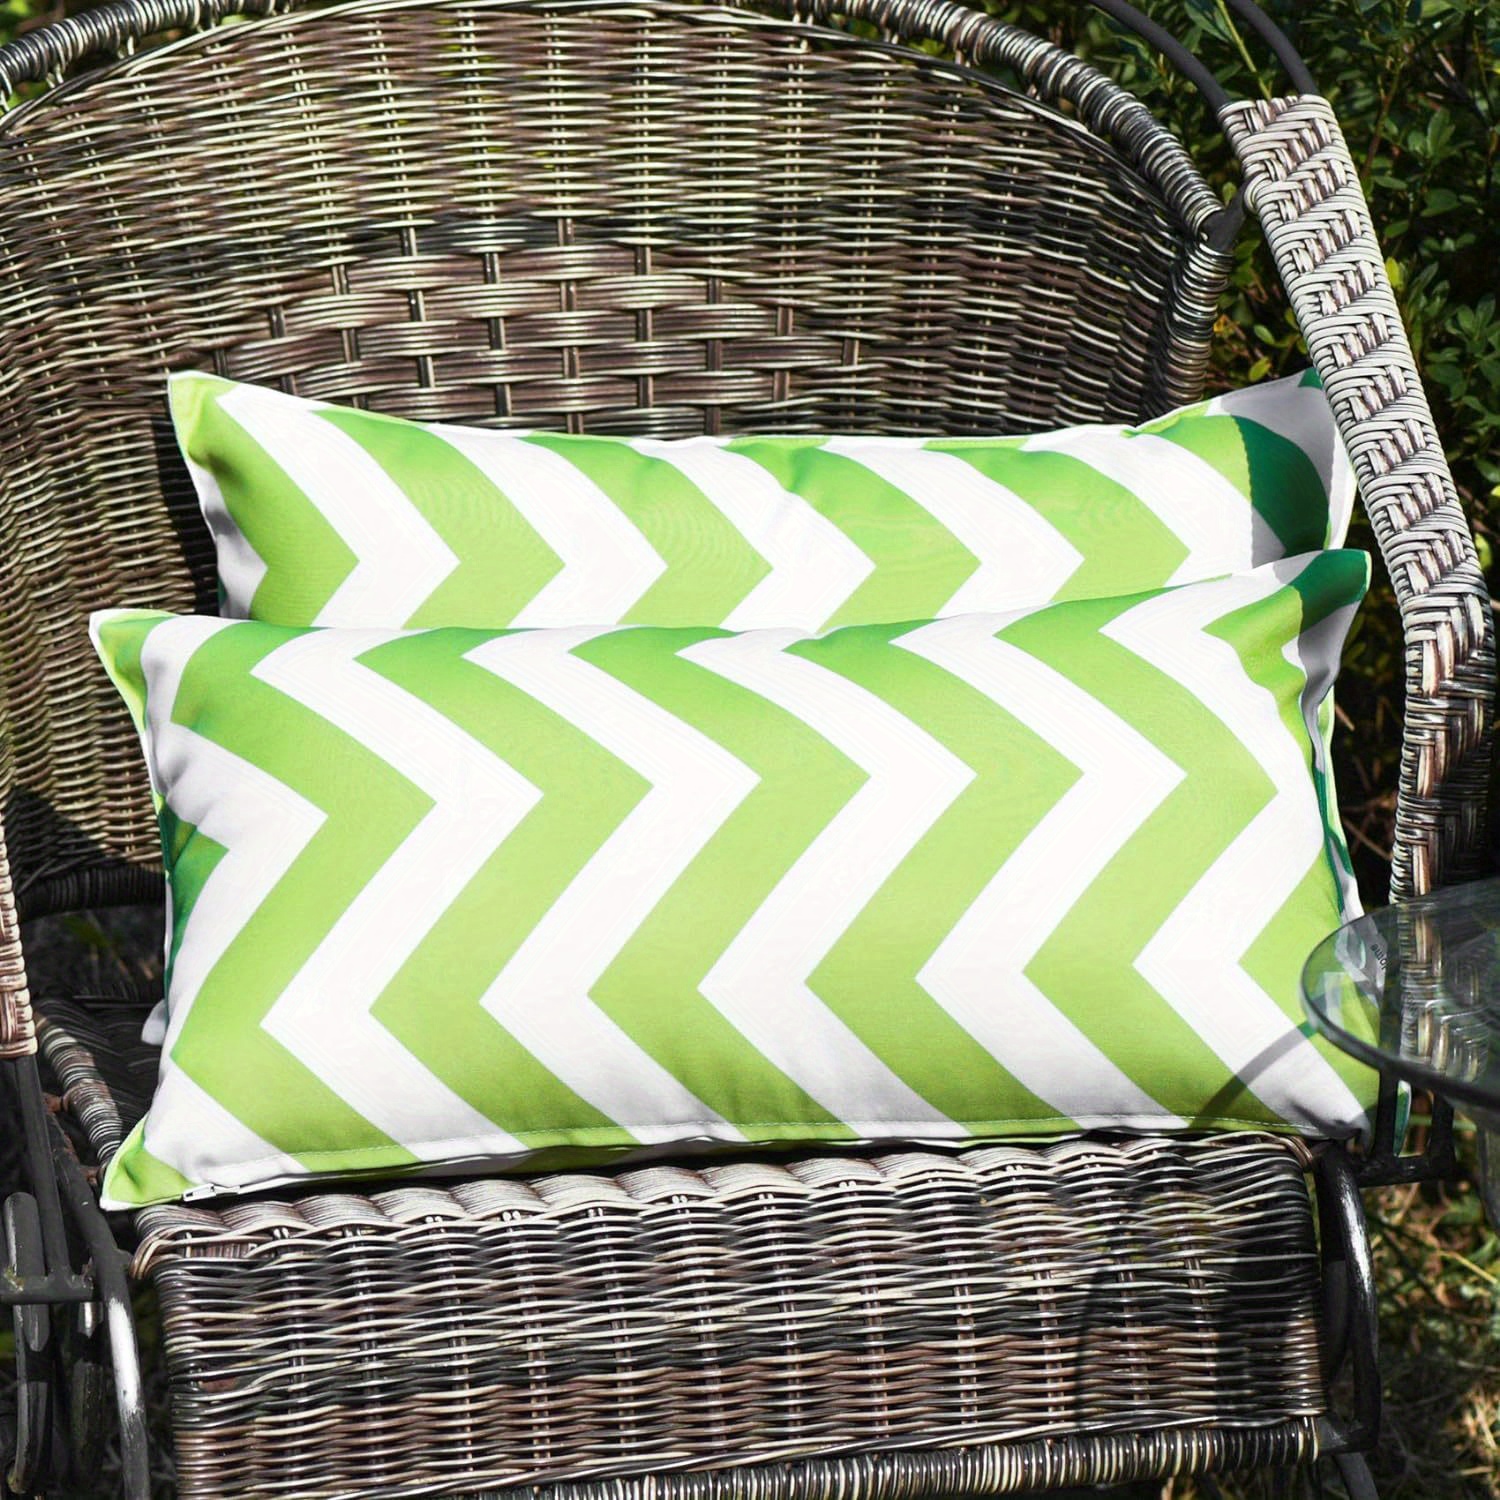 

Pack Of 2 Decorative Outdoor Waterproof Throw Pillow Covers Square Pillowcases Wave Pattern Cushion Covers Shell For Couch Patio Garden Tent Park 12 X 20 Inch Green